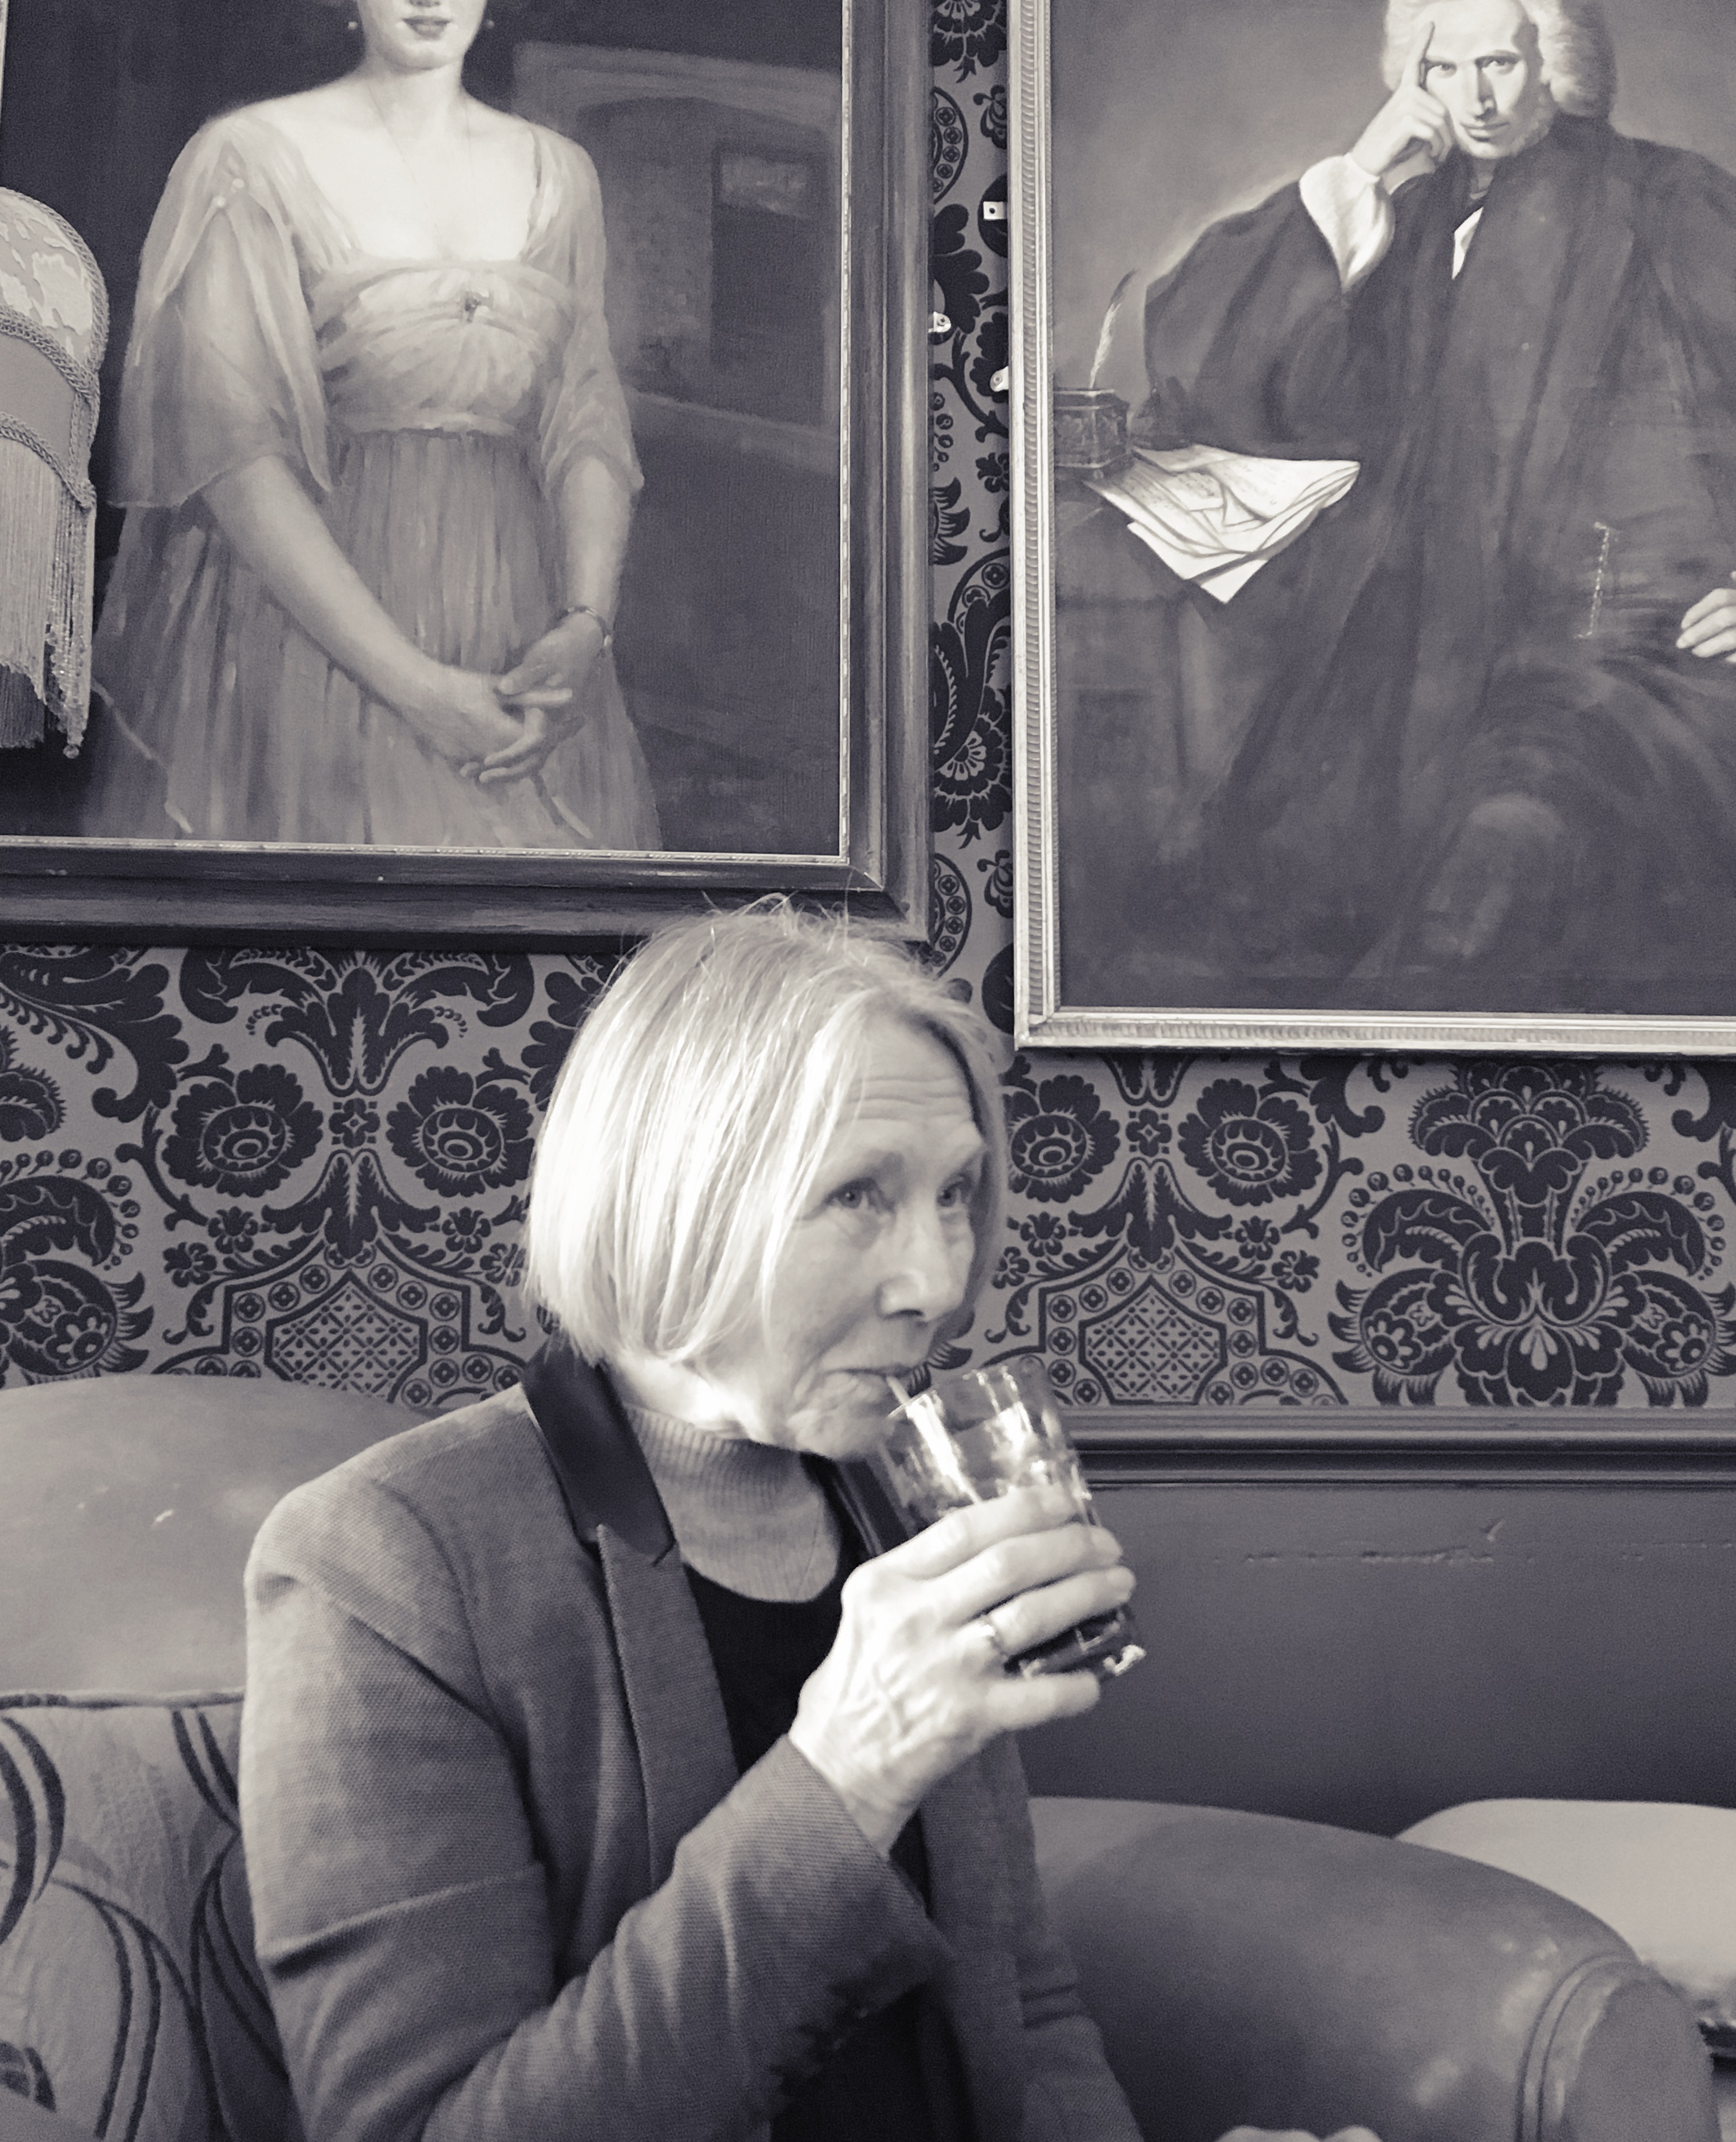 A photo of my mum taking a drink in a pub. It's in black and white.